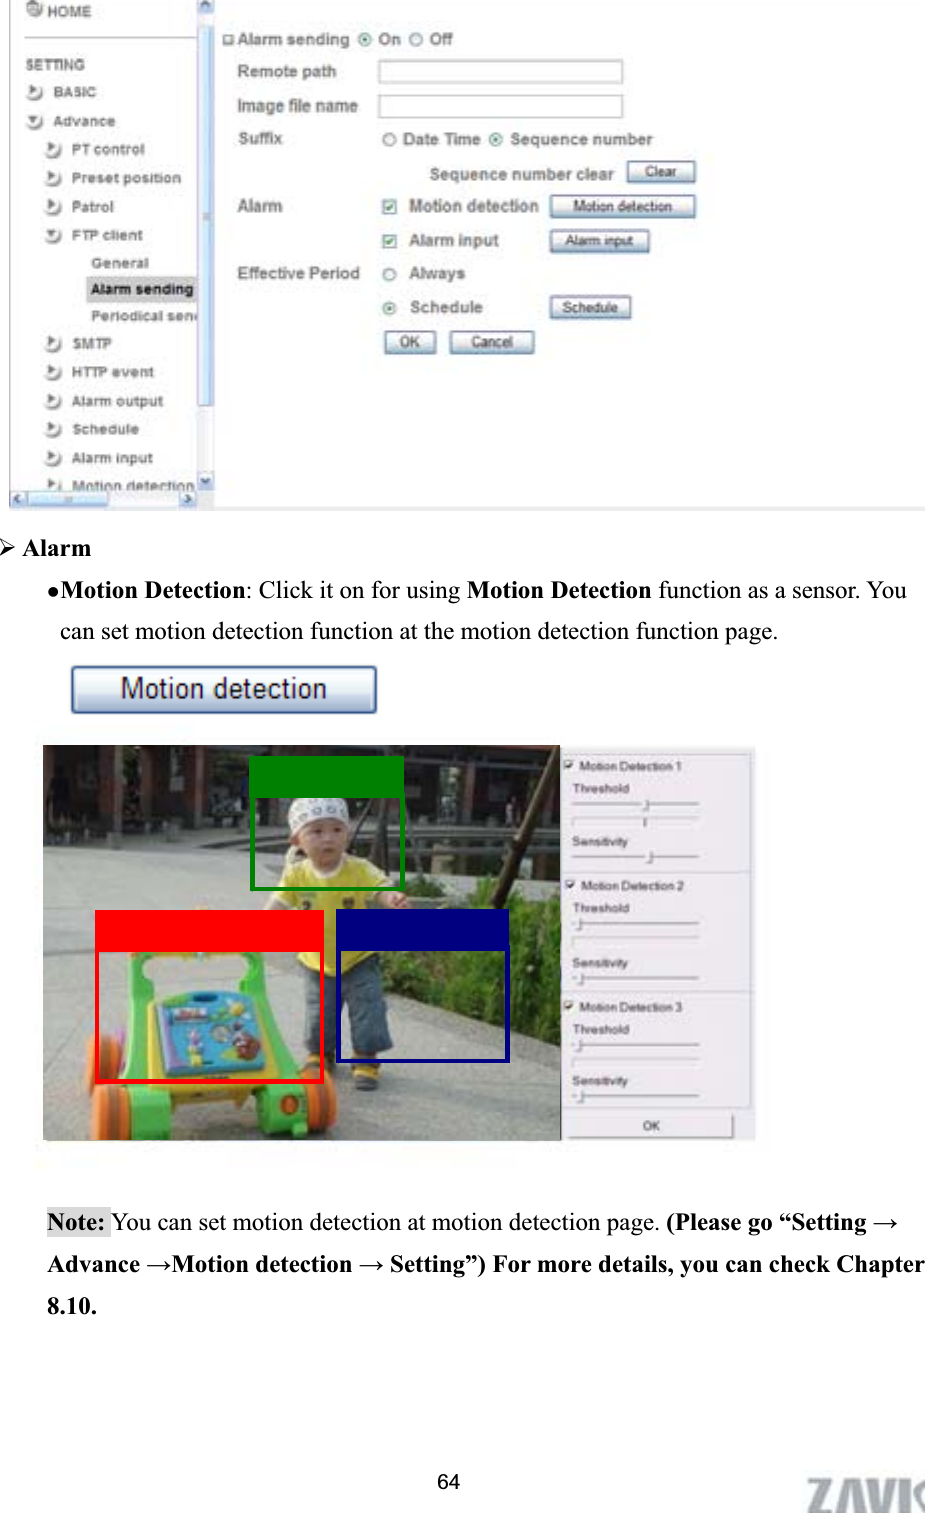      ¾AlarmzMotion Detection: Click it on for using Motion Detection function as a sensor. You can set motion detection function at the motion detection function page. Note: You can set motion detection at motion detection page. (Please go “Setting ĺAdvance ĺMotion detection ĺ Setting”) For more details, you can check Chapter 8.10.64